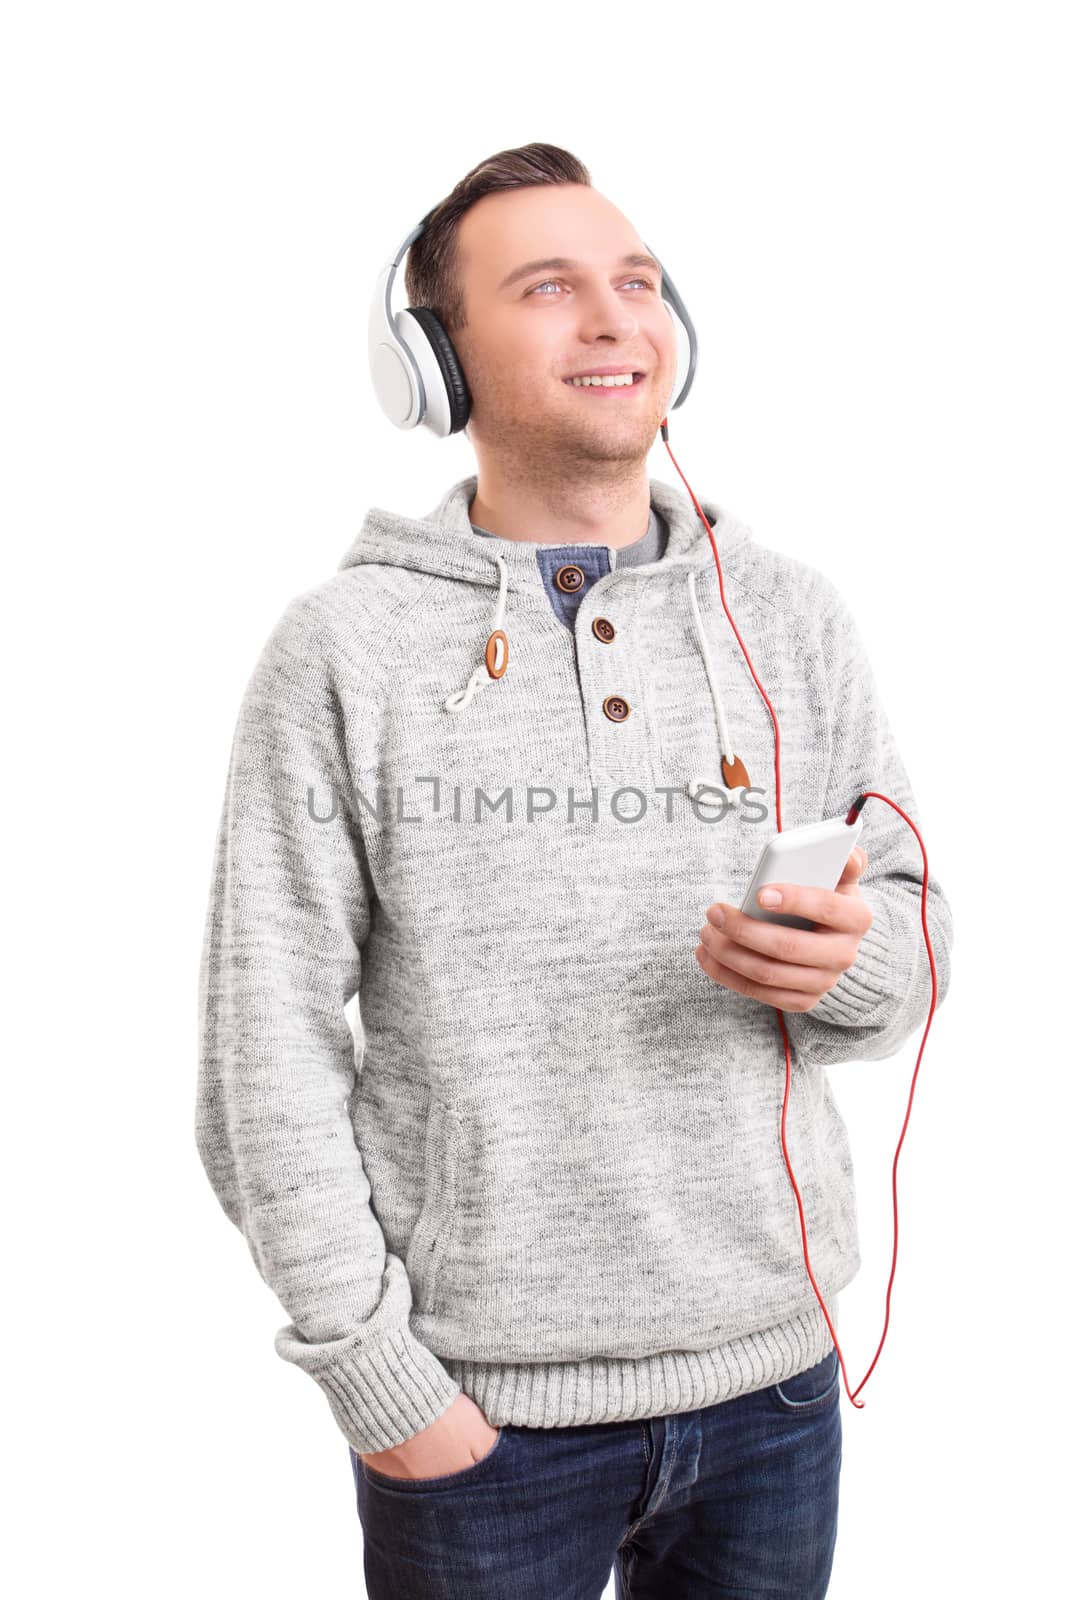 Young man listening to music on headphones by Mendelex